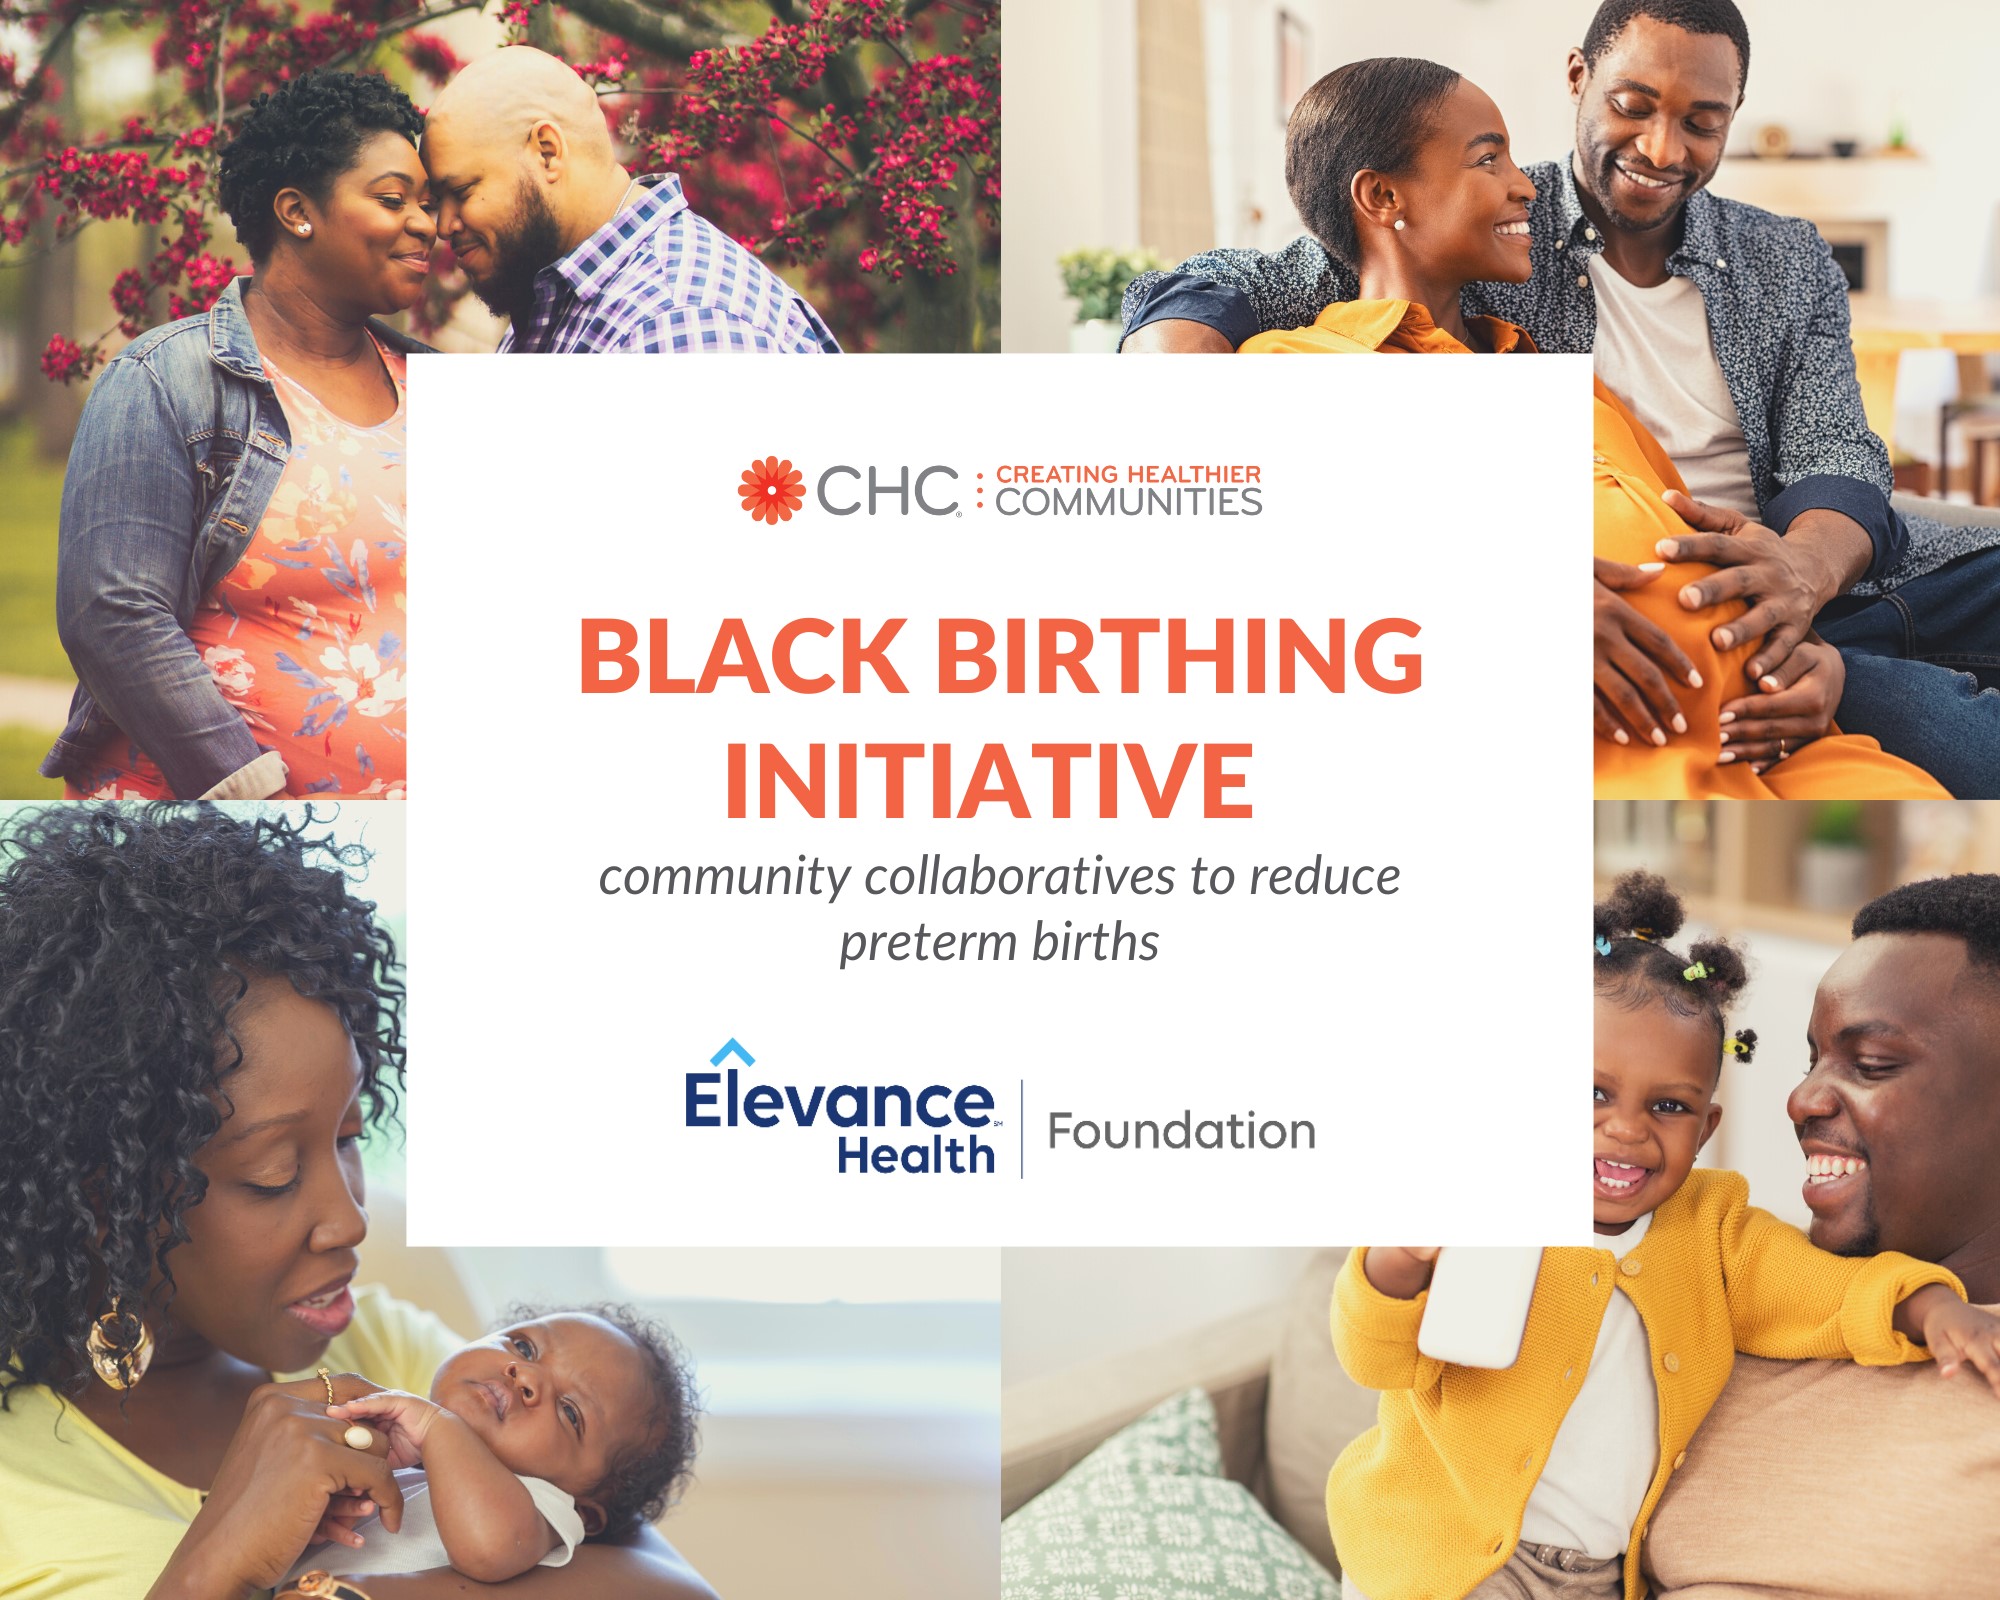 CHC: Creating Healthier Communities announces next phase of $7 million Black Birthing Initiative partnership with Elevance Health Foundation